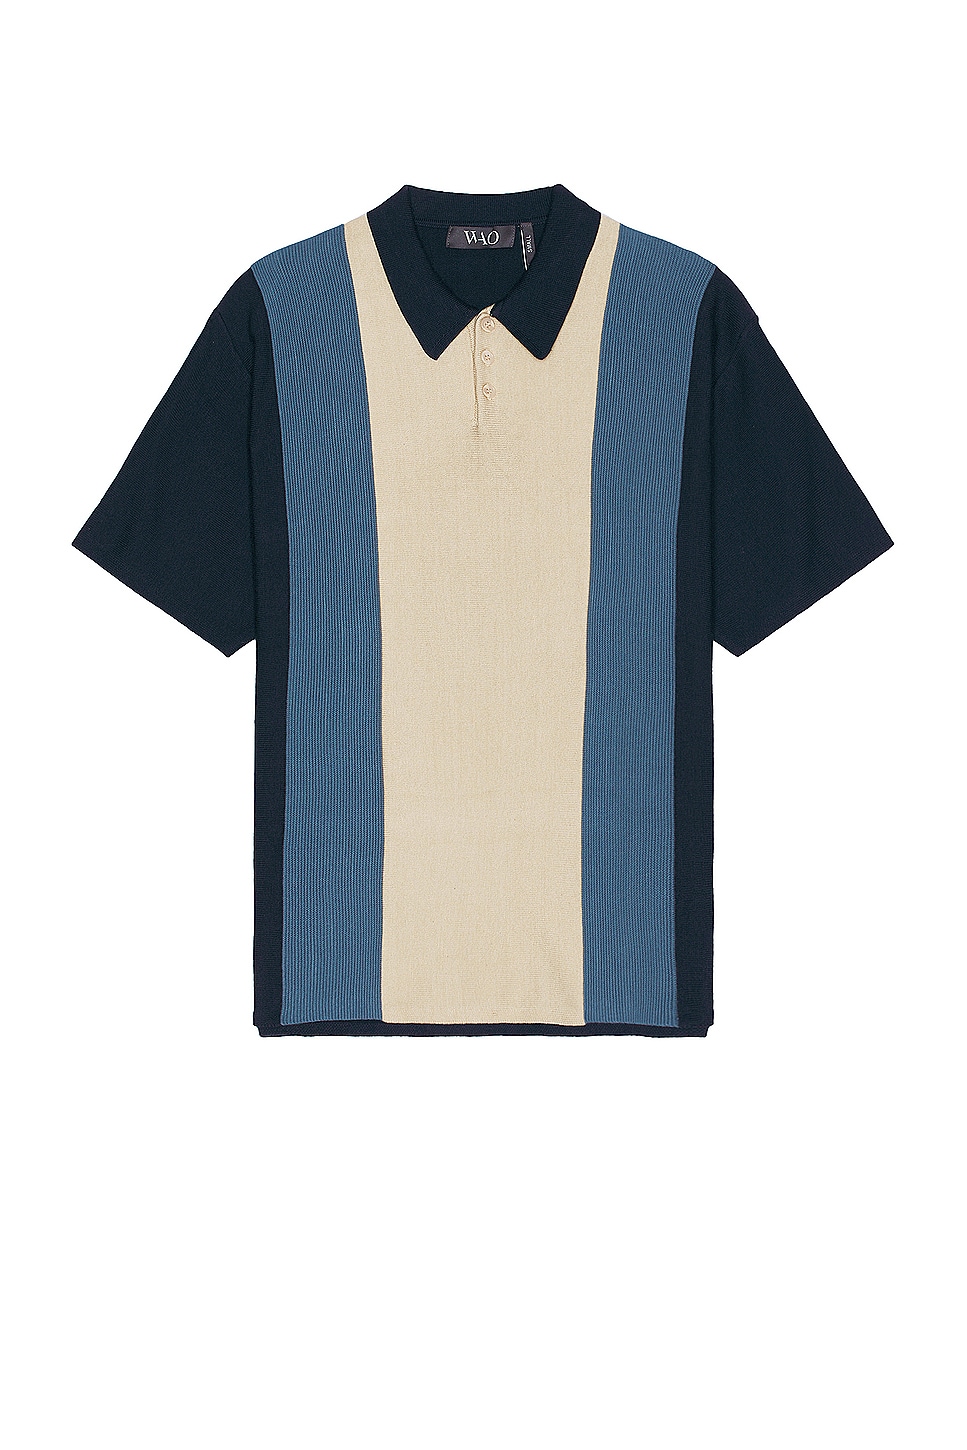 Image 1 of WAO Short Sleeve Stripe Knit Polo in Navy & Gold